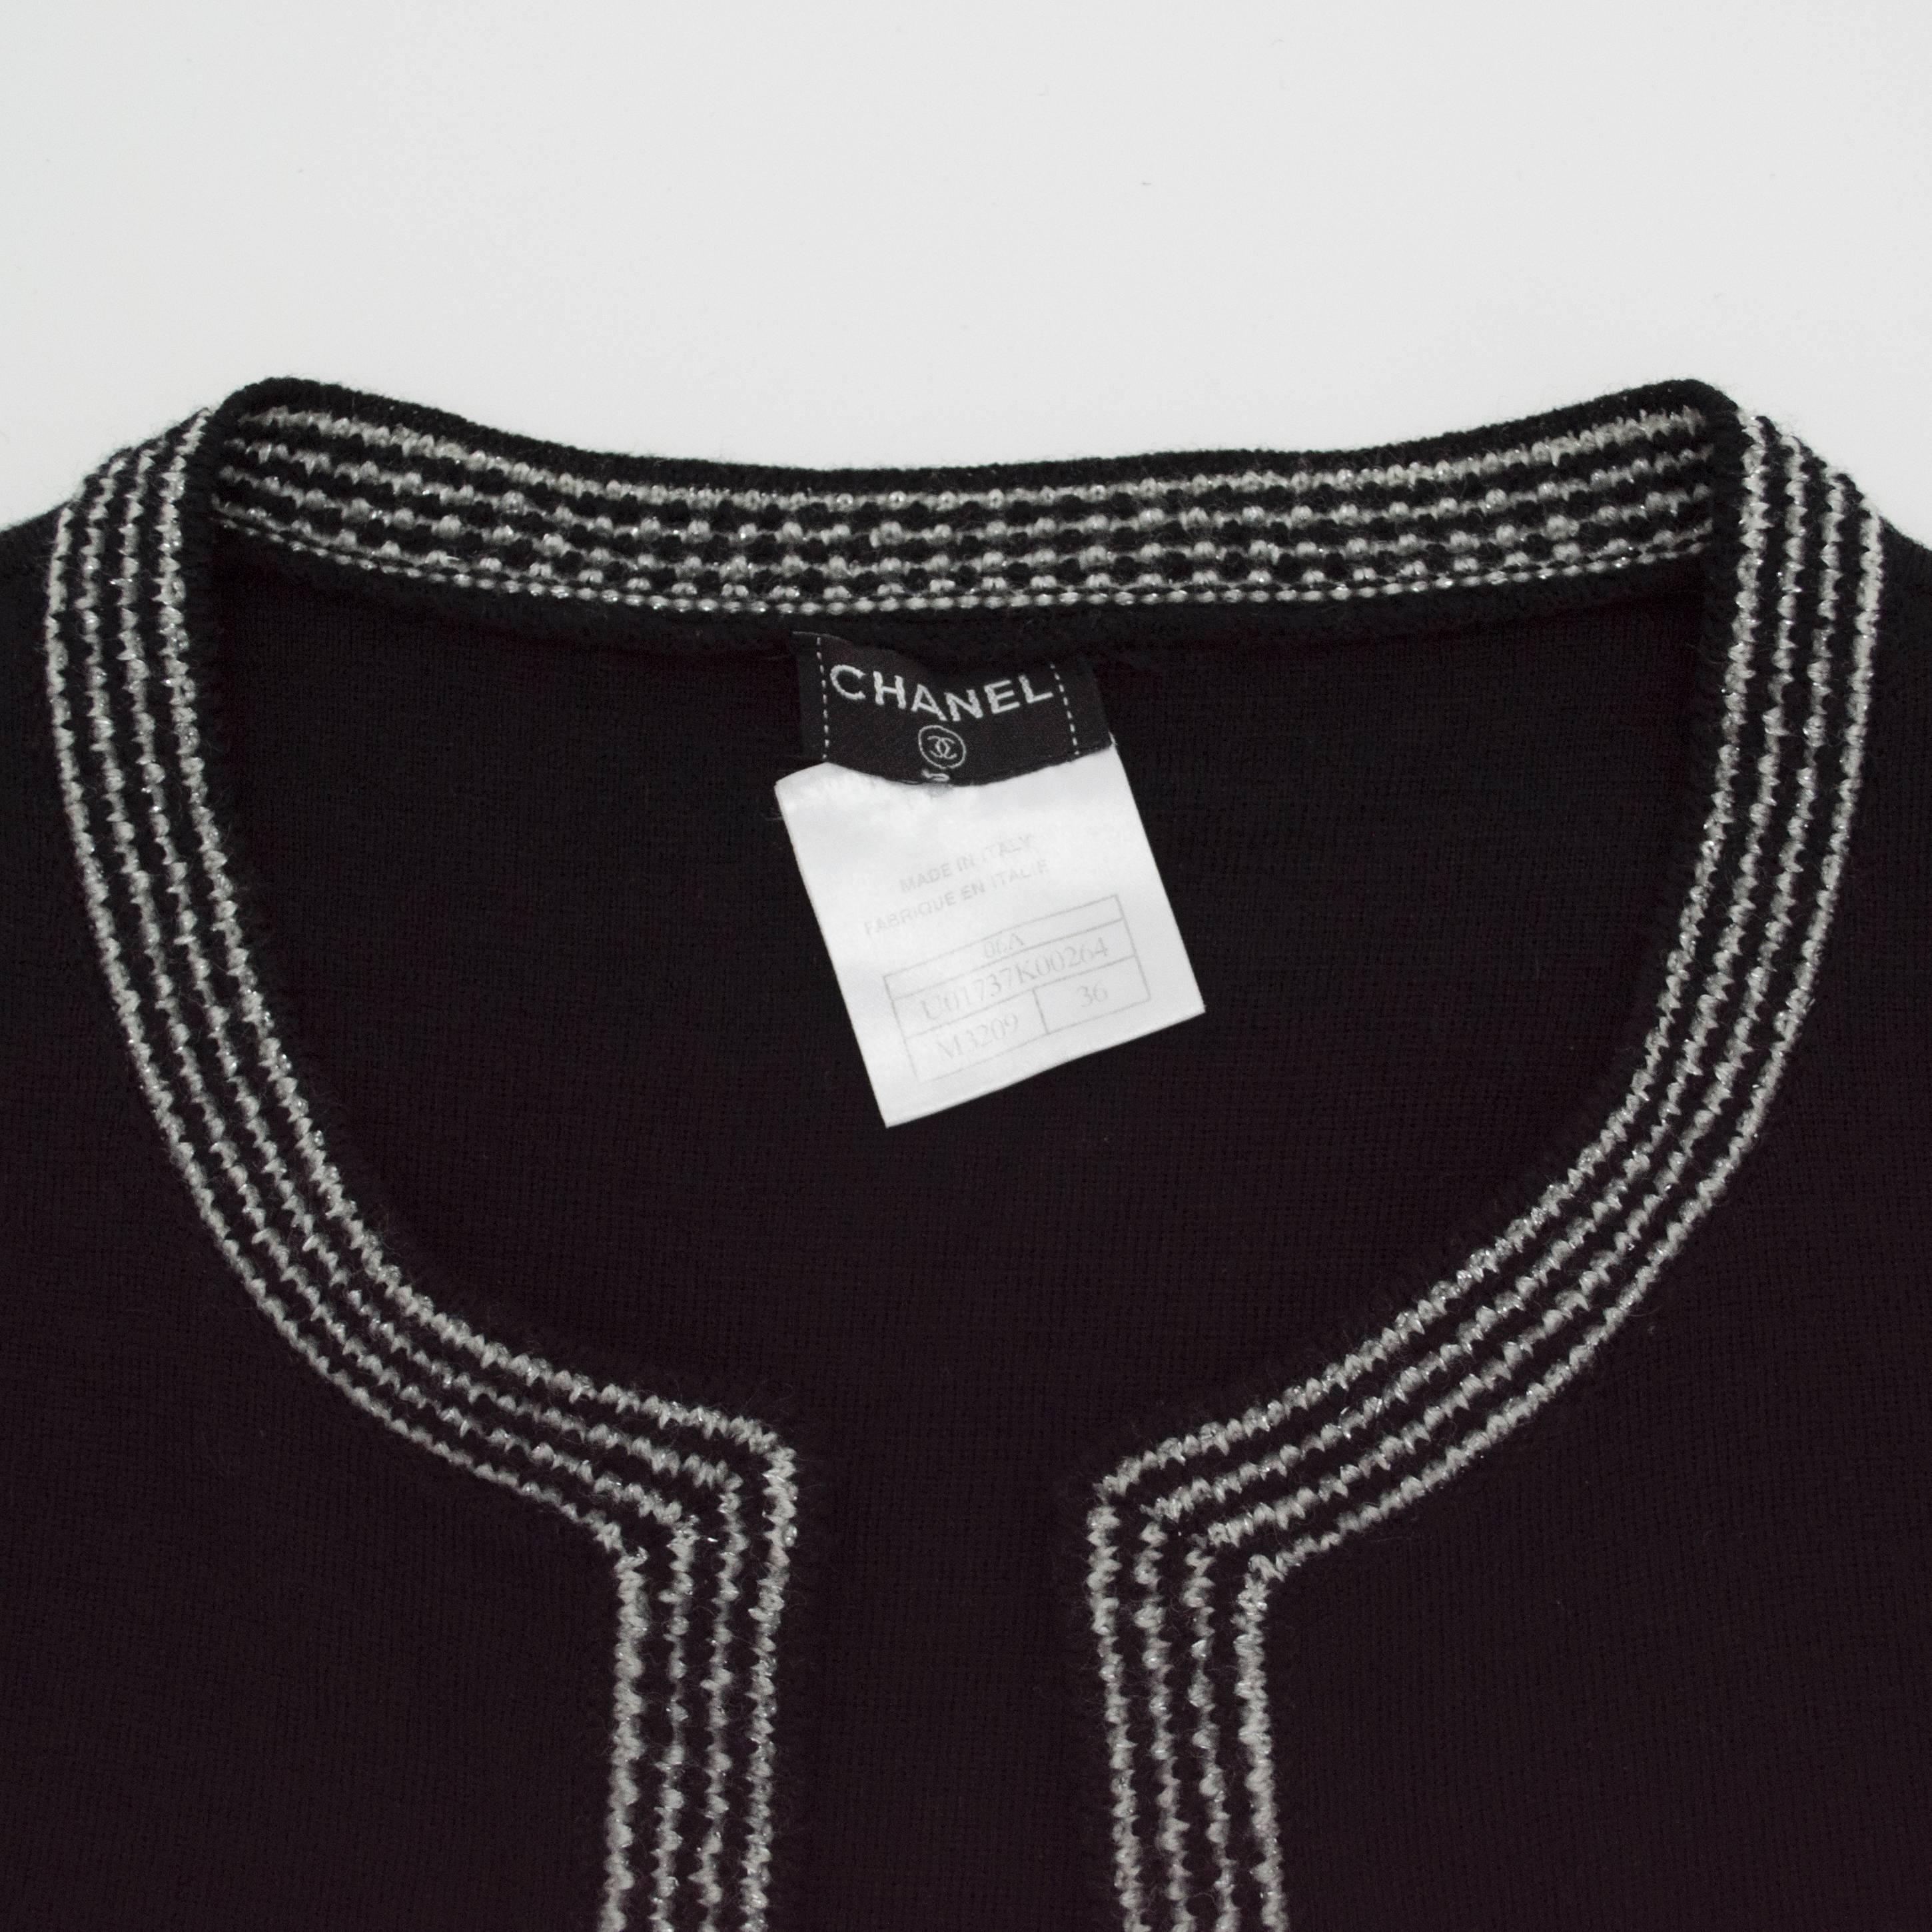 Chanel 2 pc black metallic trimmed short sleeve shell with matching sleeveless vest both in size 36. Soft lighter weight wool with rayon, poly blend. Short Sleeve sweater includes a Chanel name plated rhodium metal button on the bust. From the 2006